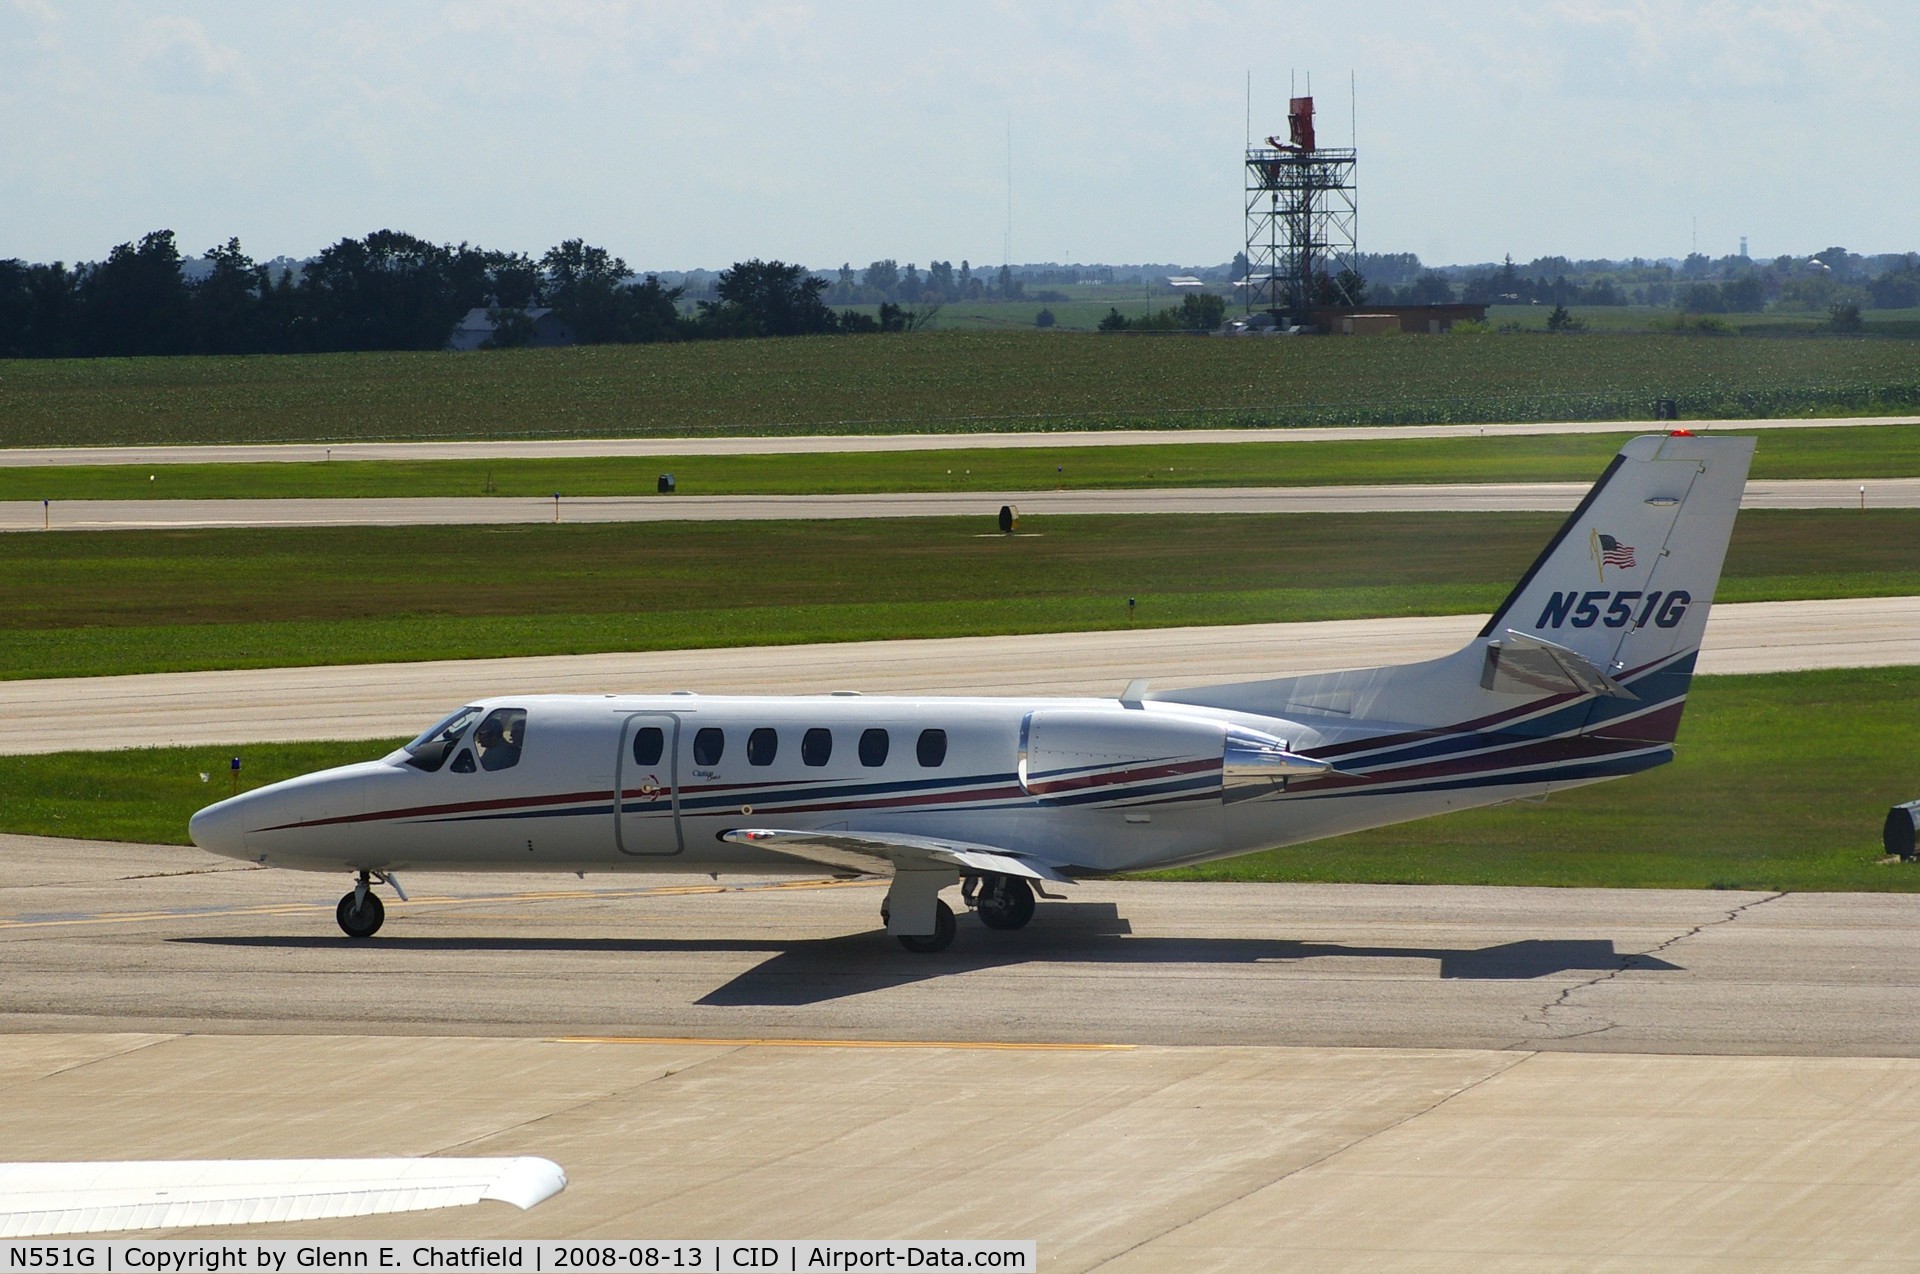 N551G, 2001 Cessna 550 Citation Bravo C/N 550-0968, Taxiing to Runway 27 for departure.